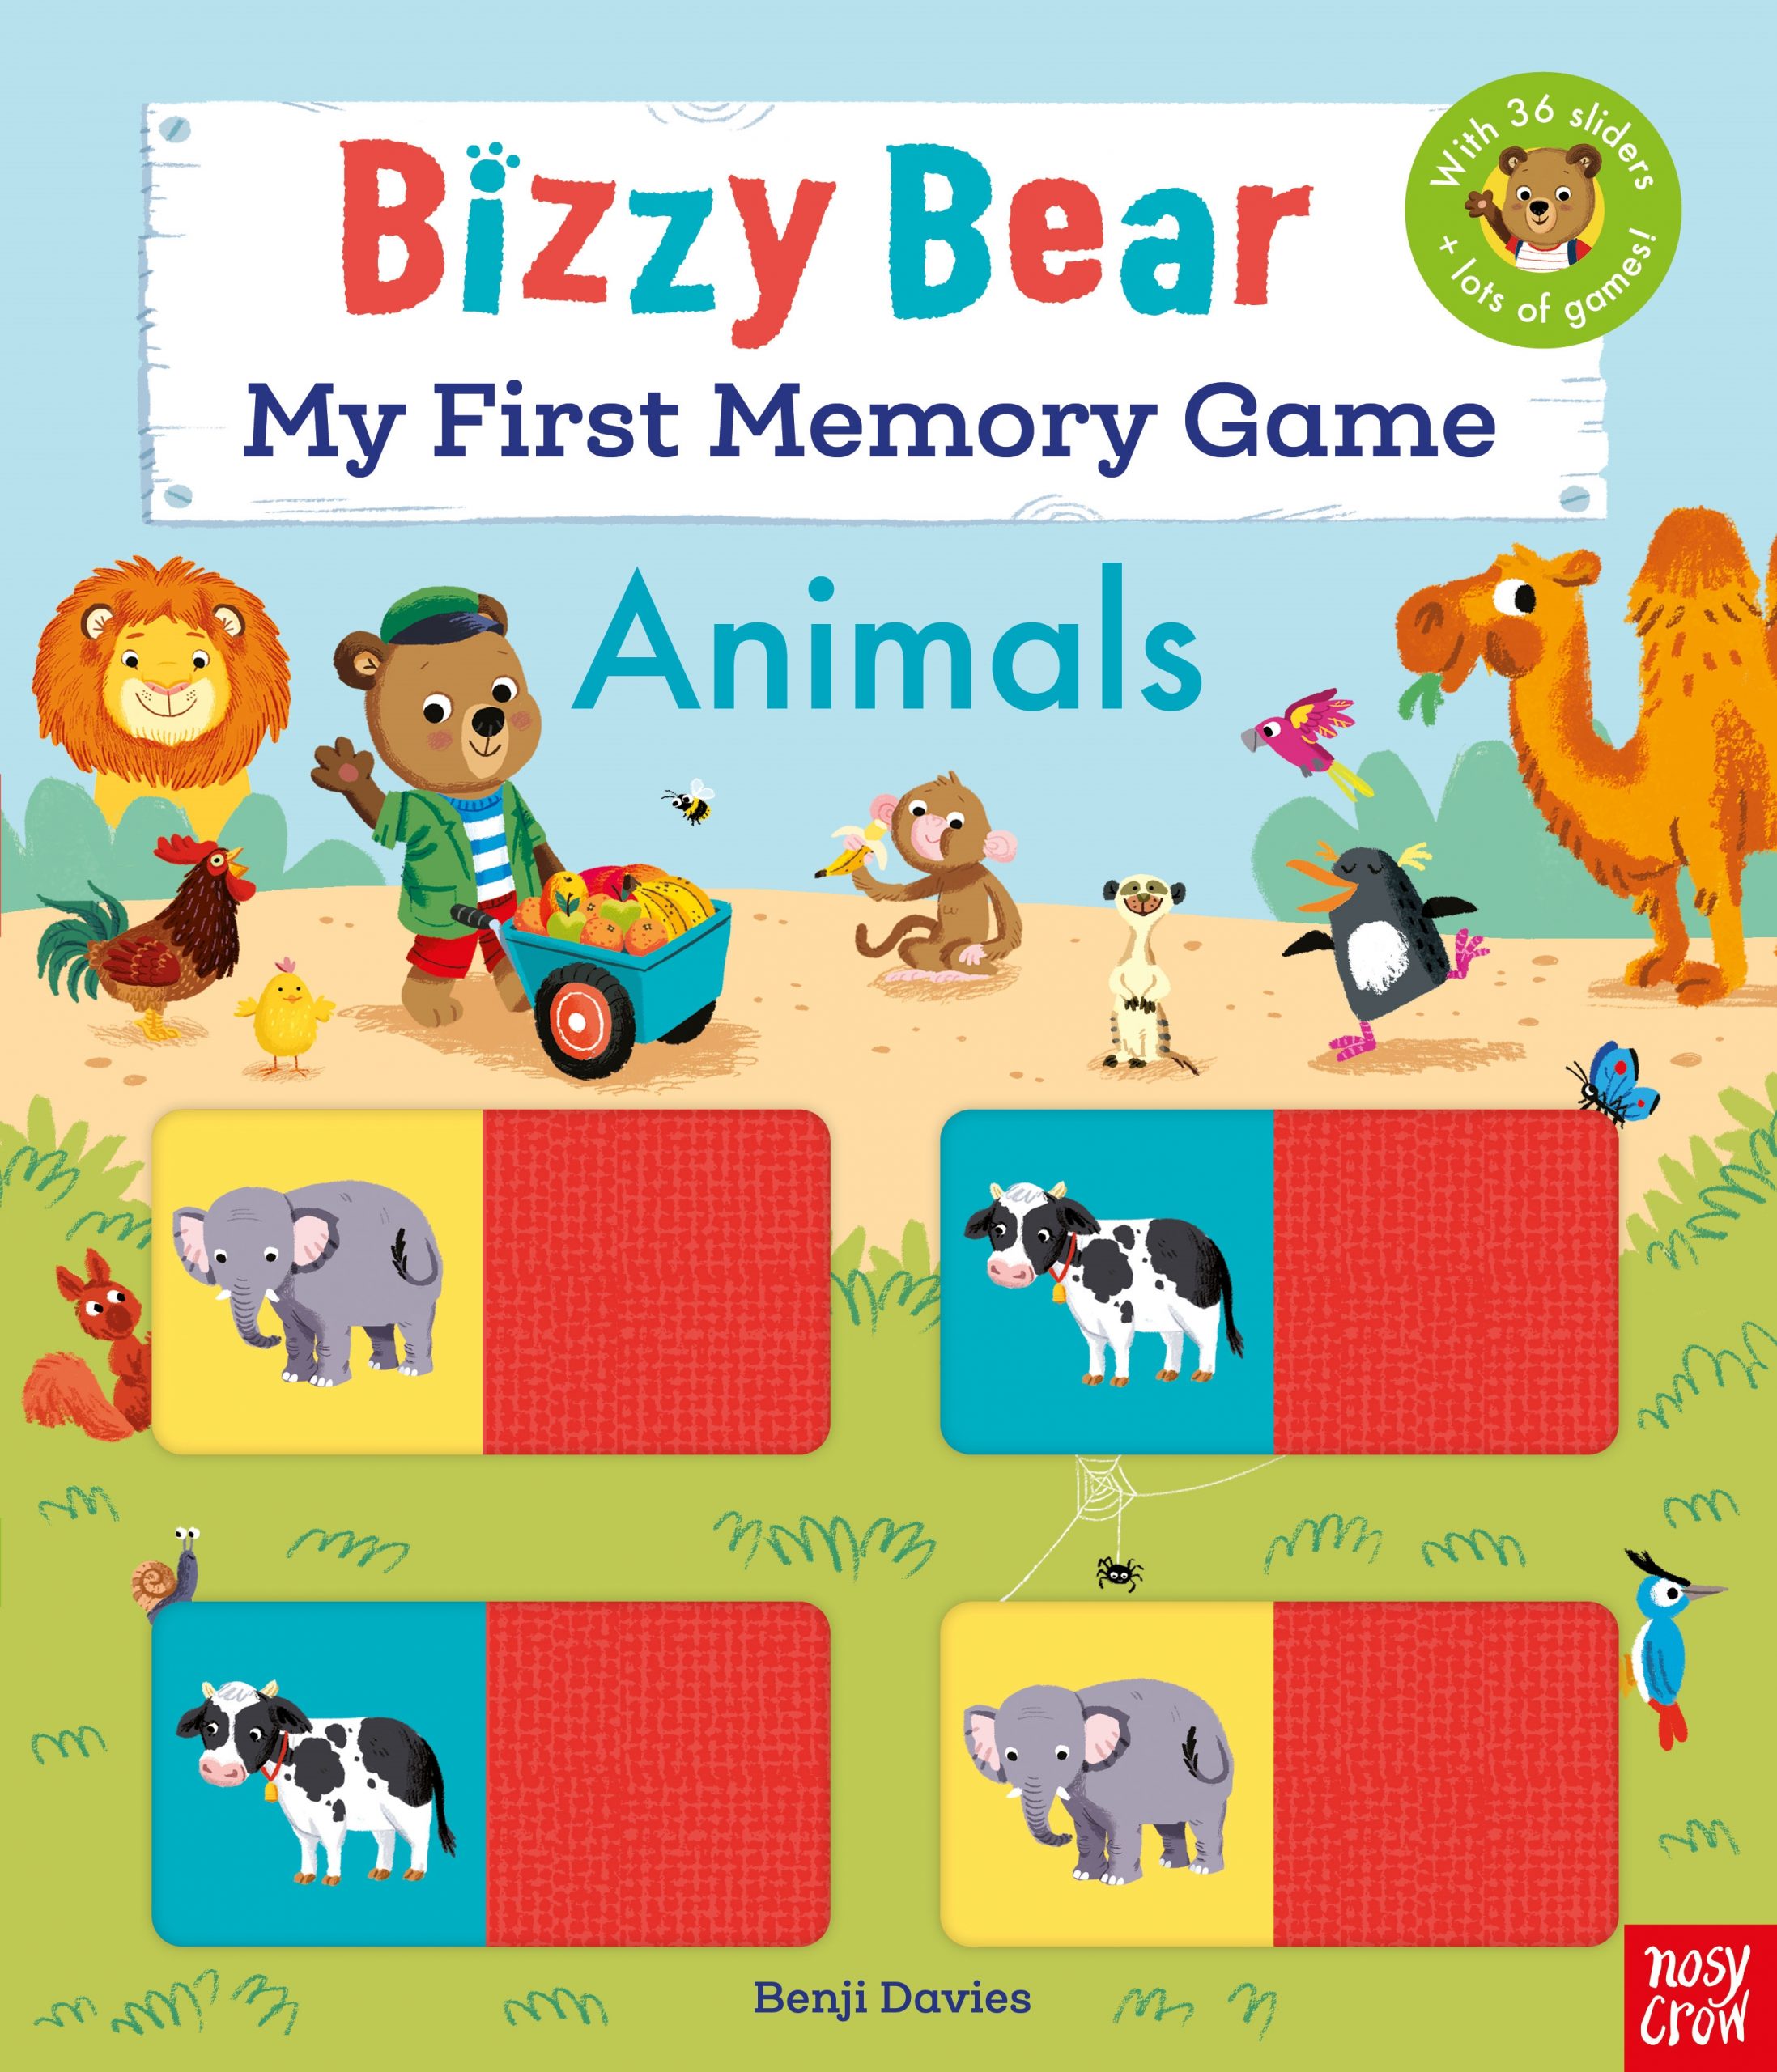 Bizzy Bear: My First Memory Game Book - Animals